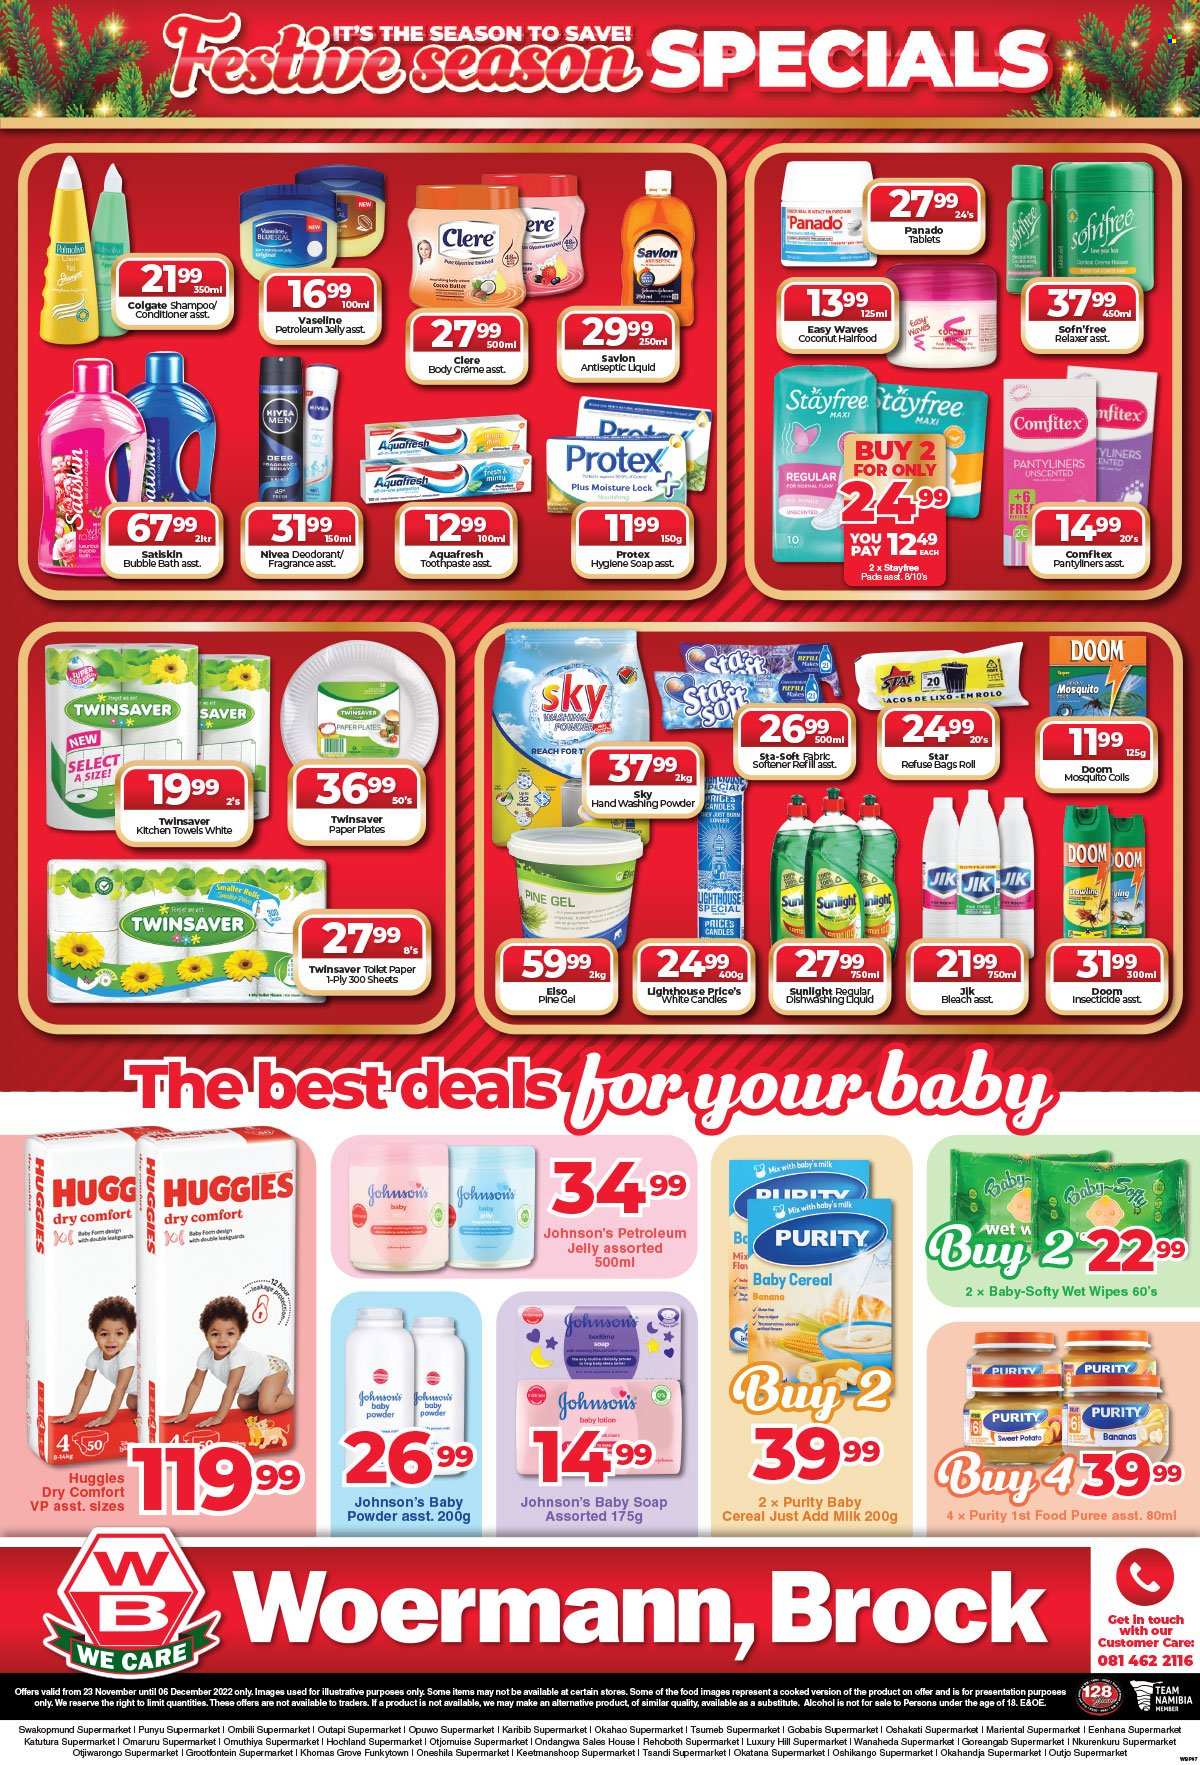 Woermann Brock catalogue  - 23/11/2022 - 06/12/2022 - Sales products - sweet potato, bananas, milk, cereals, alcohol, Purity, wipes, Huggies, Johnson's, kitchen towels, bleach, fabric softener, softener refill, laundry powder, Sunlight, dishwashing liquid, bubble bath, shampoo, Nivea, Palmolive, Protex, Vaseline, Satiskin, soap, Colgate, toothpaste, Stayfree, pantyliners, petroleum jelly, conditioner, body lotion, Clere, anti-perspirant, fragrance, deodorant. Page 7.